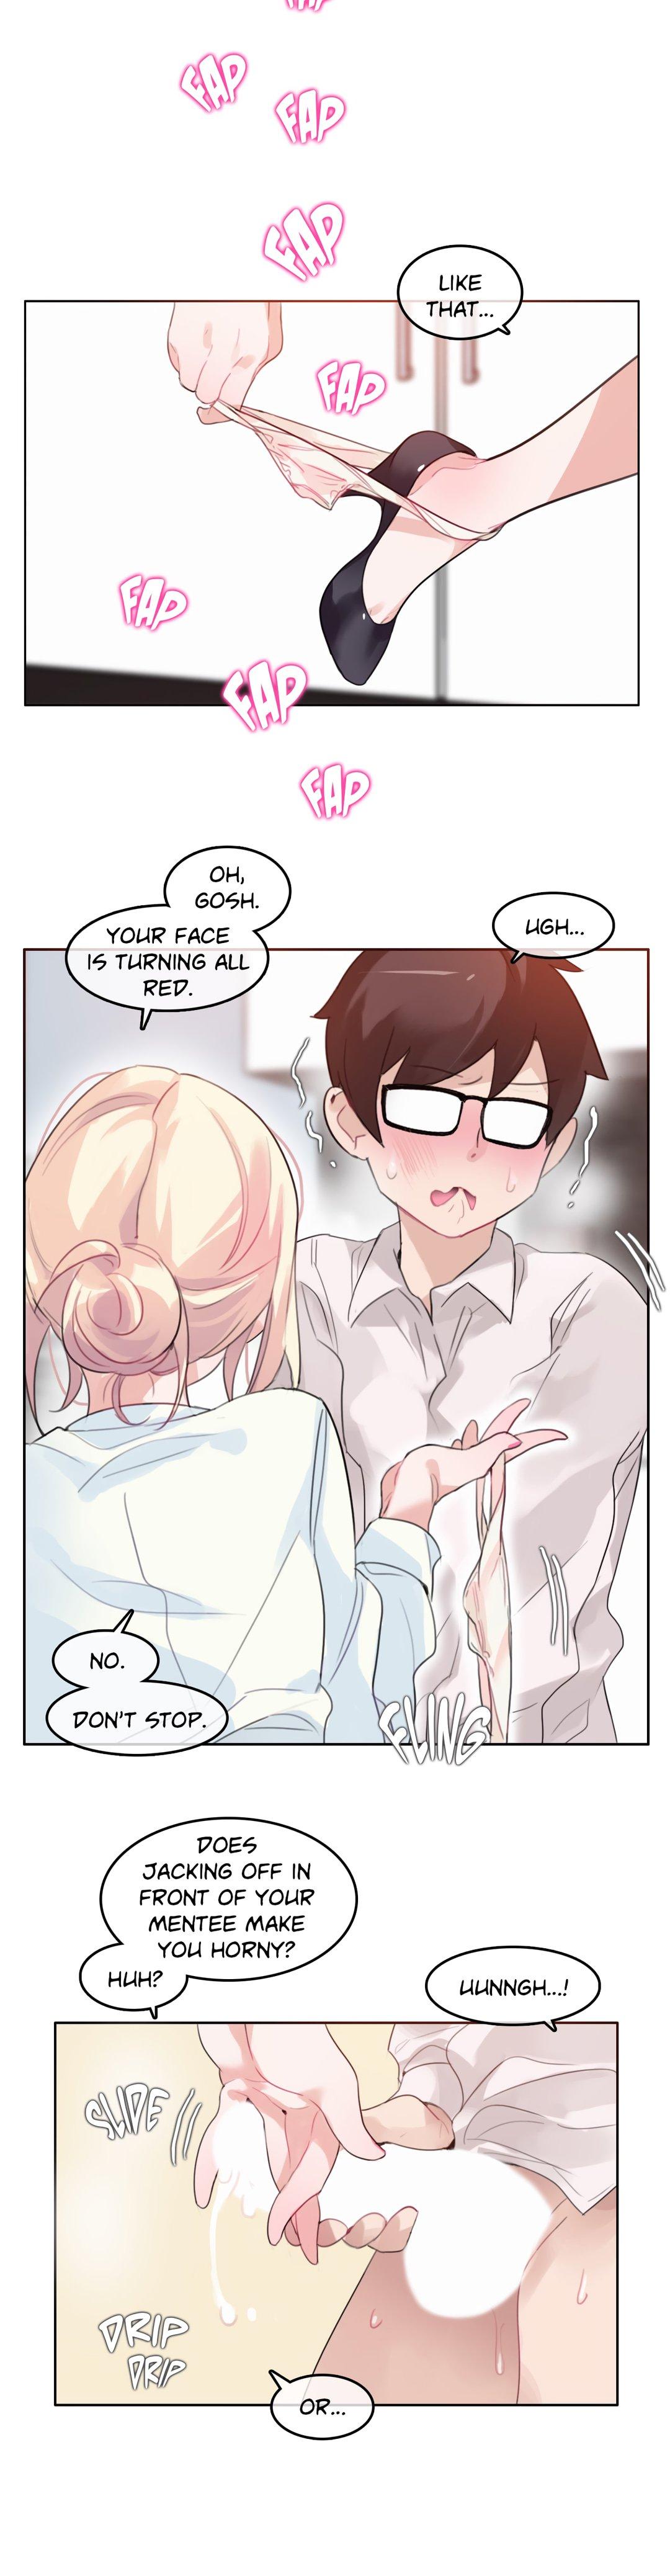 A Pervert's Daily Life • Chapter 31-35 41